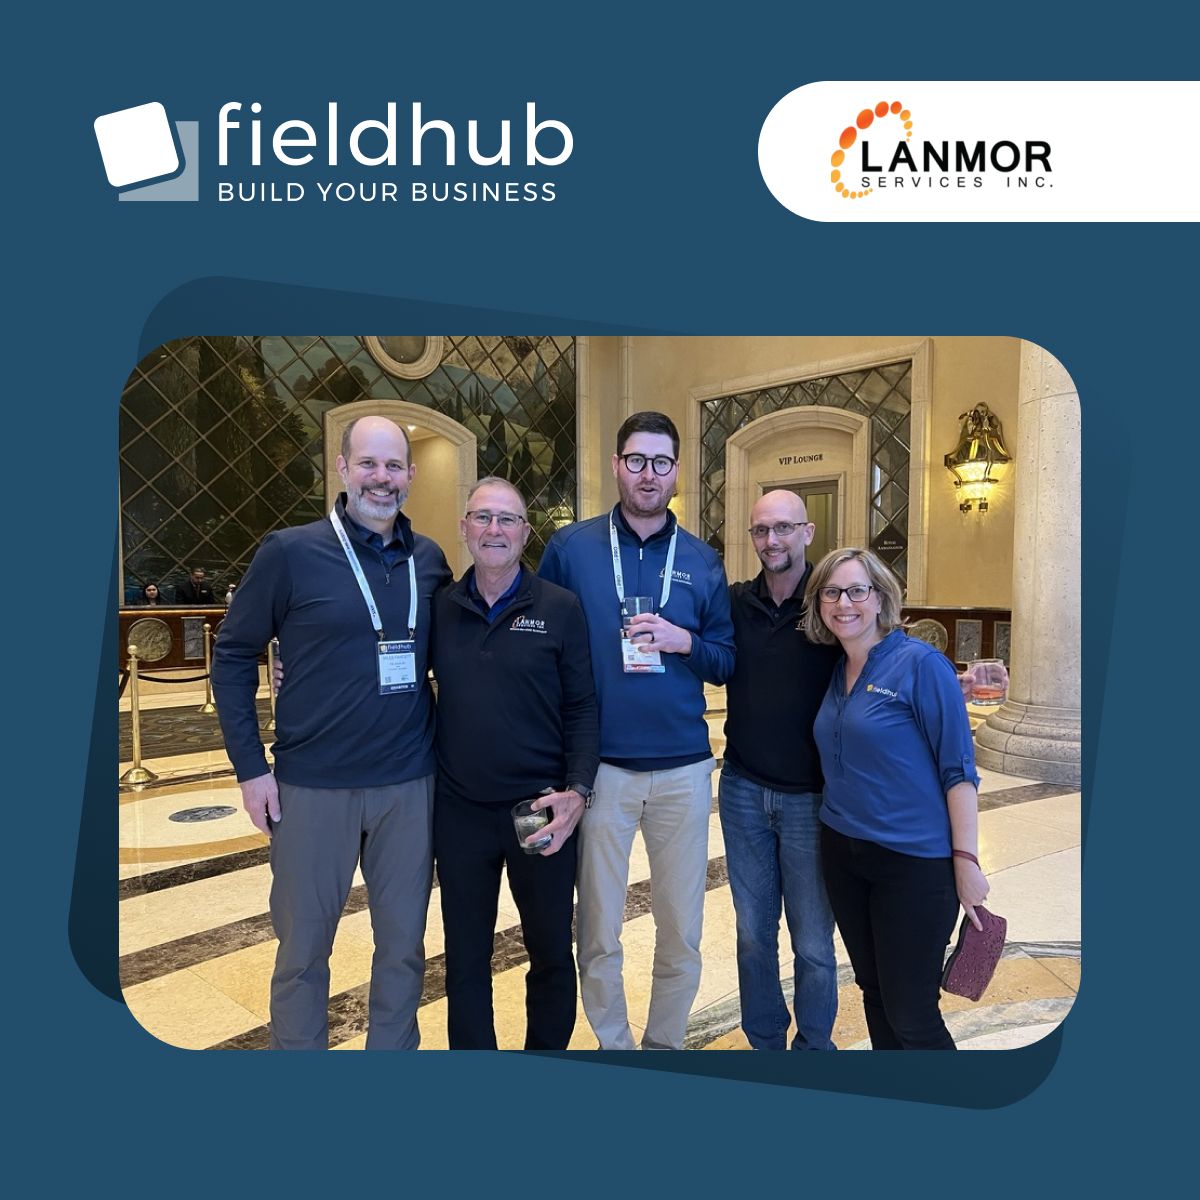 Thrilled to have connected with so many amazing customers including Lanmor Services Inc at ISC West! We're incredibly grateful for the opportunity to serve this industry. #ISCWest #securityindustry #fieldservices